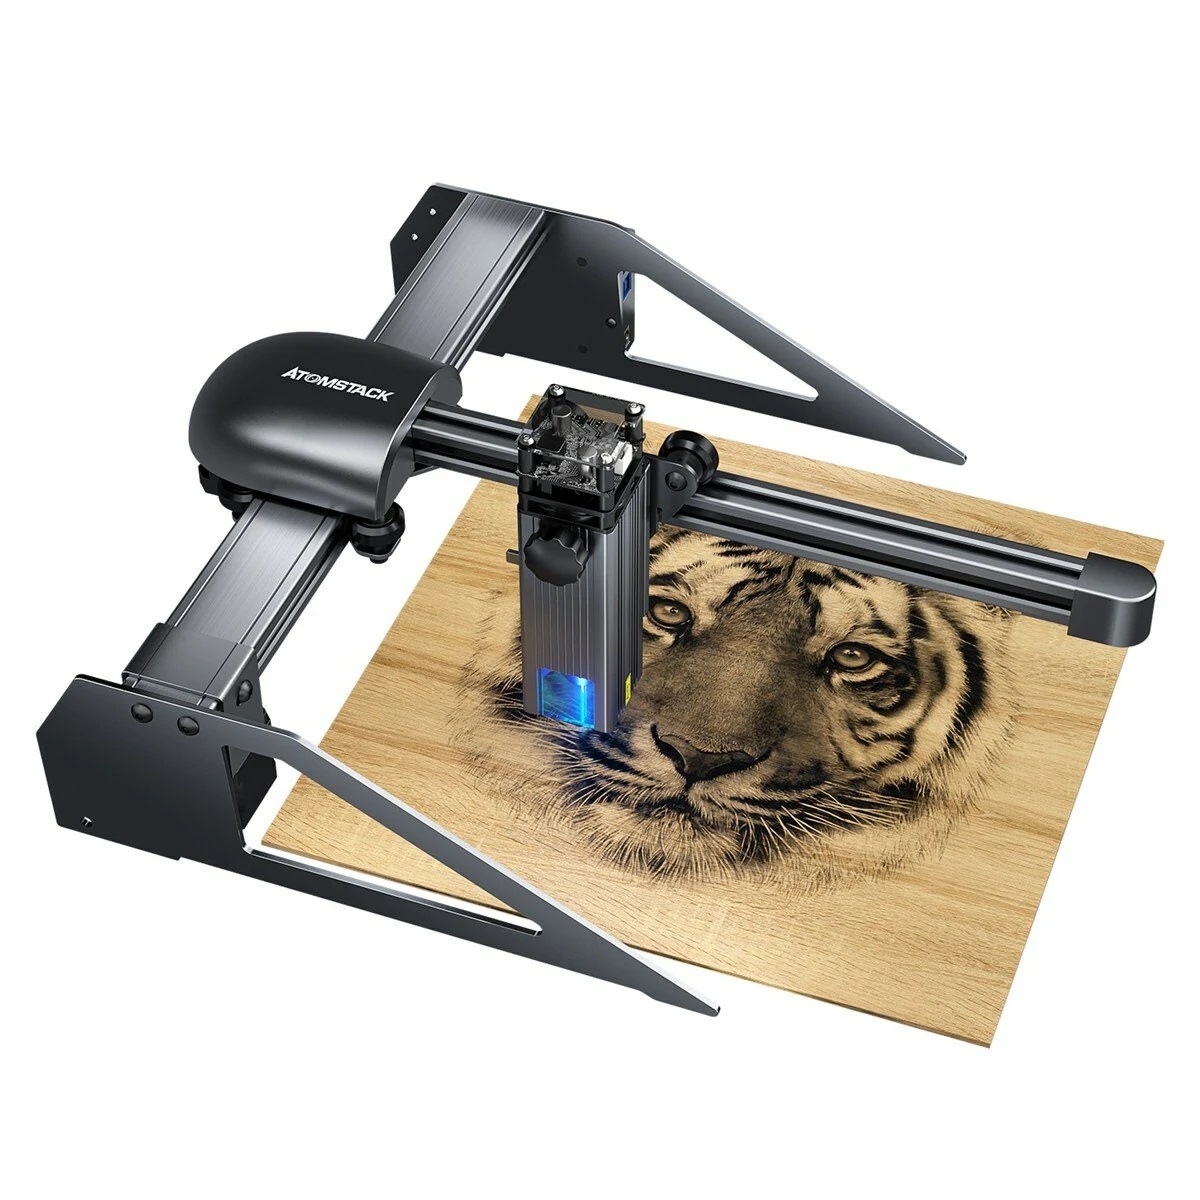 Find EU DIRECT New ATOMSTACK P7 M40 Portable Laser Engraving Machine Cutter Wood Cutting Design Desktop DIY Laser Engraver New Eye Protection Design Upgrated Ultra Fine Laser Focal Area for Sale on Gipsybee.com with cryptocurrencies